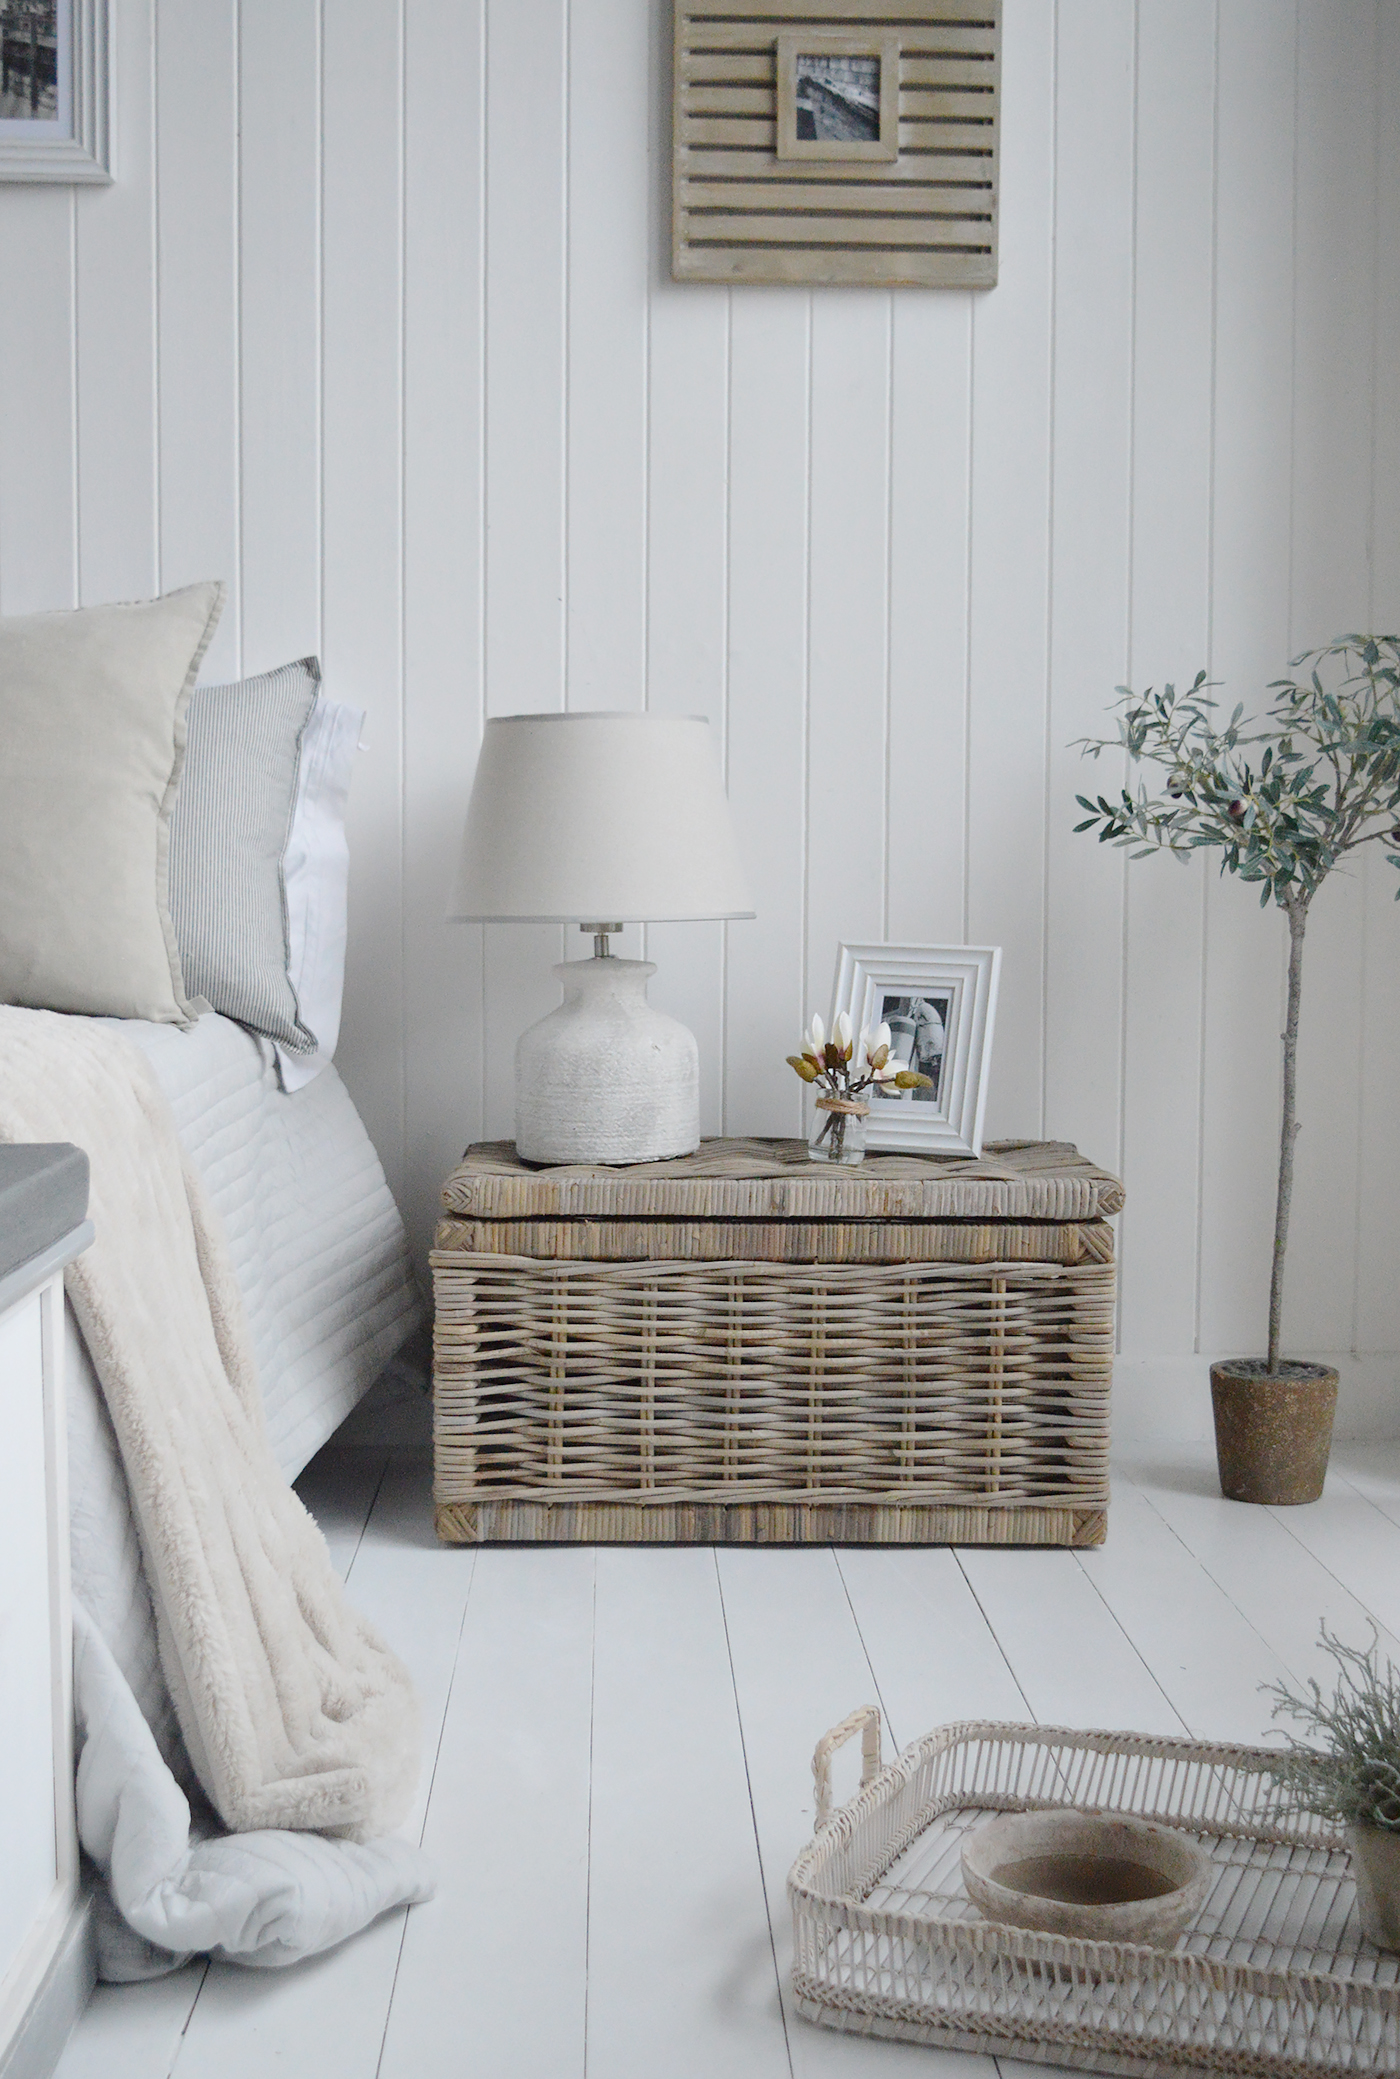 The Seaside basket as a bedside table in a modern country bedroom